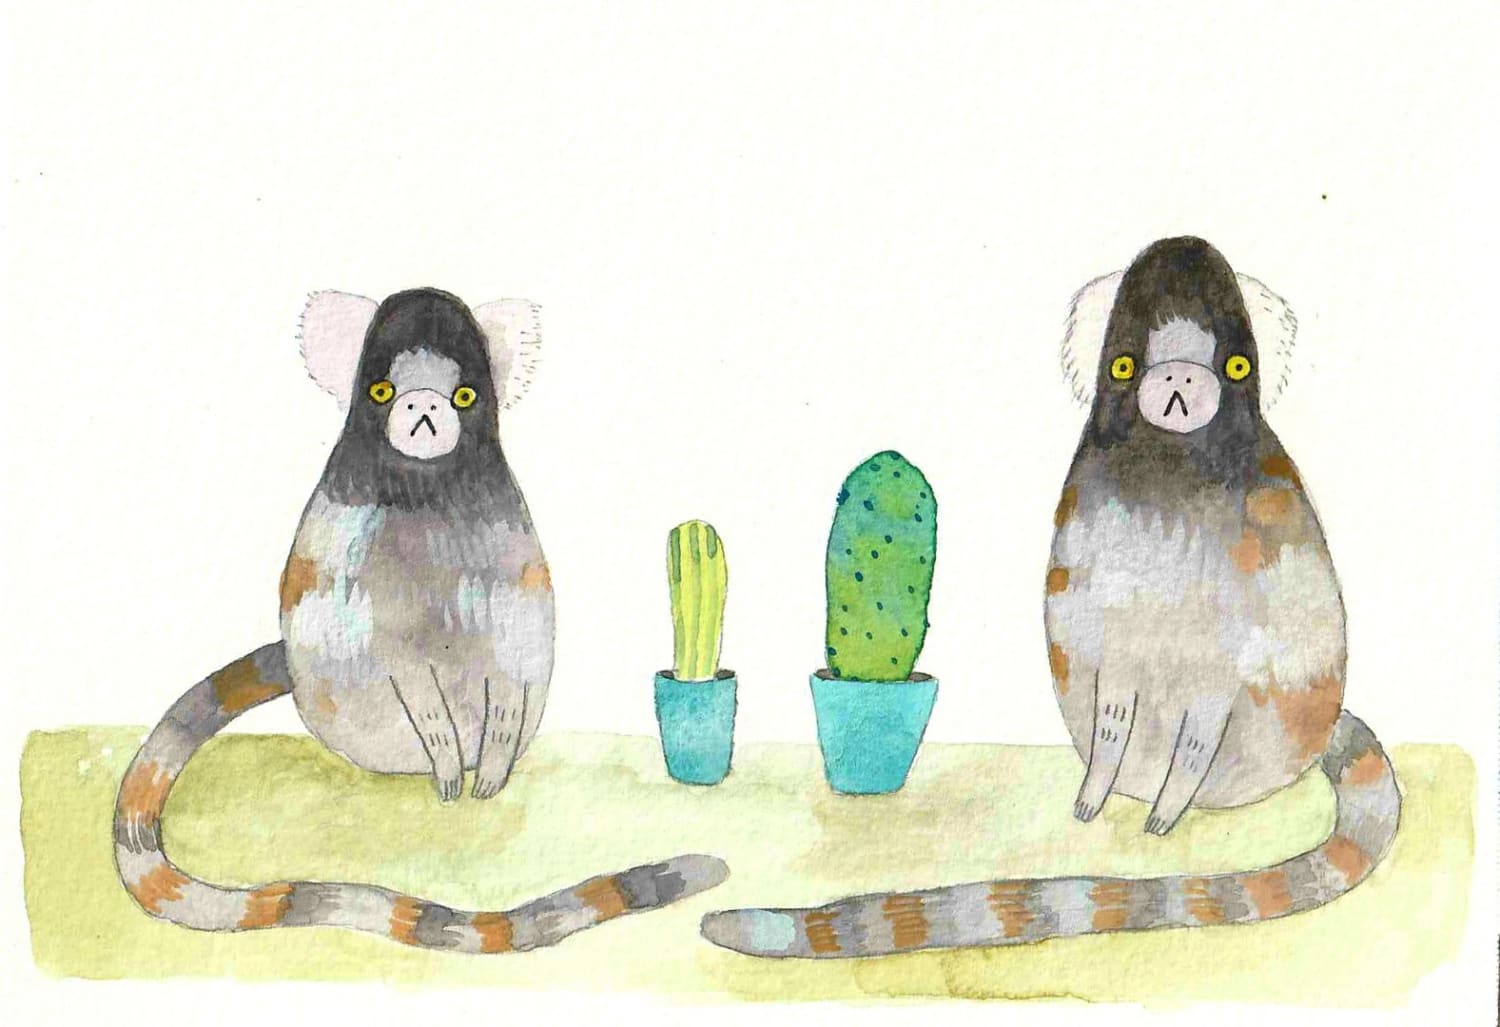 Untitled marmosets painting I made. Watercolor and graphite on" paper.